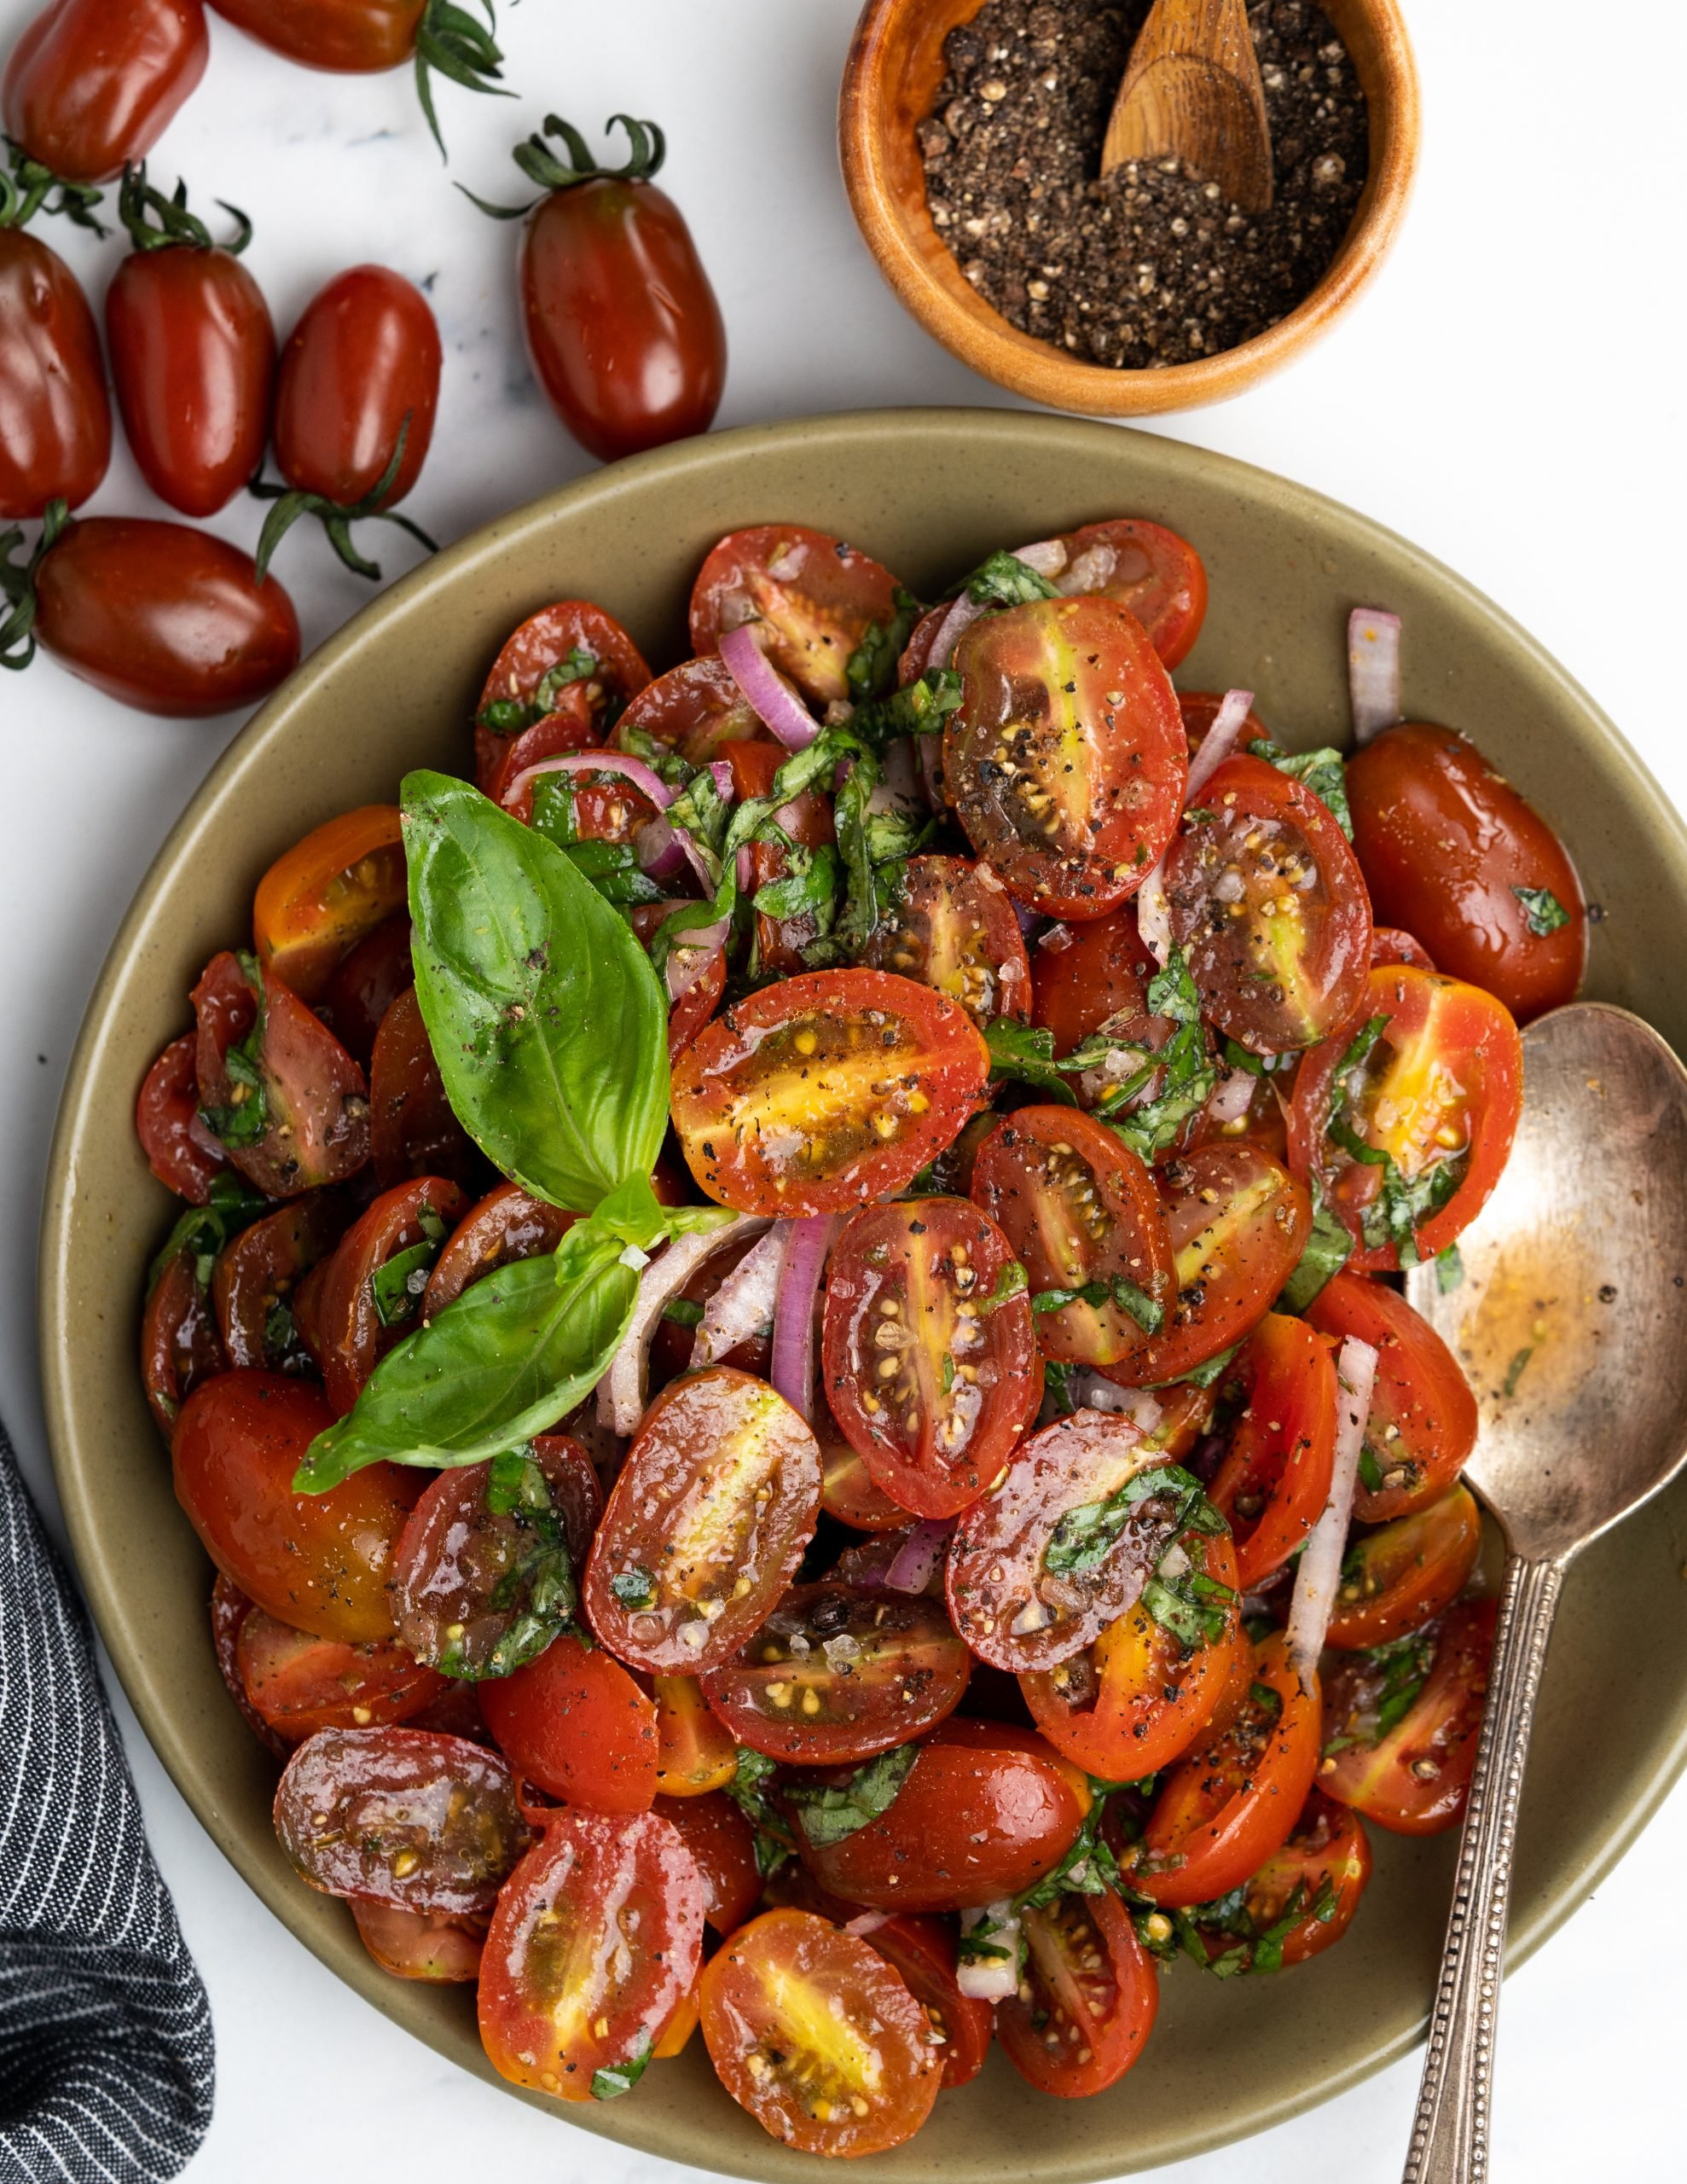 Plate of fresh cherry tomato salad with basil.